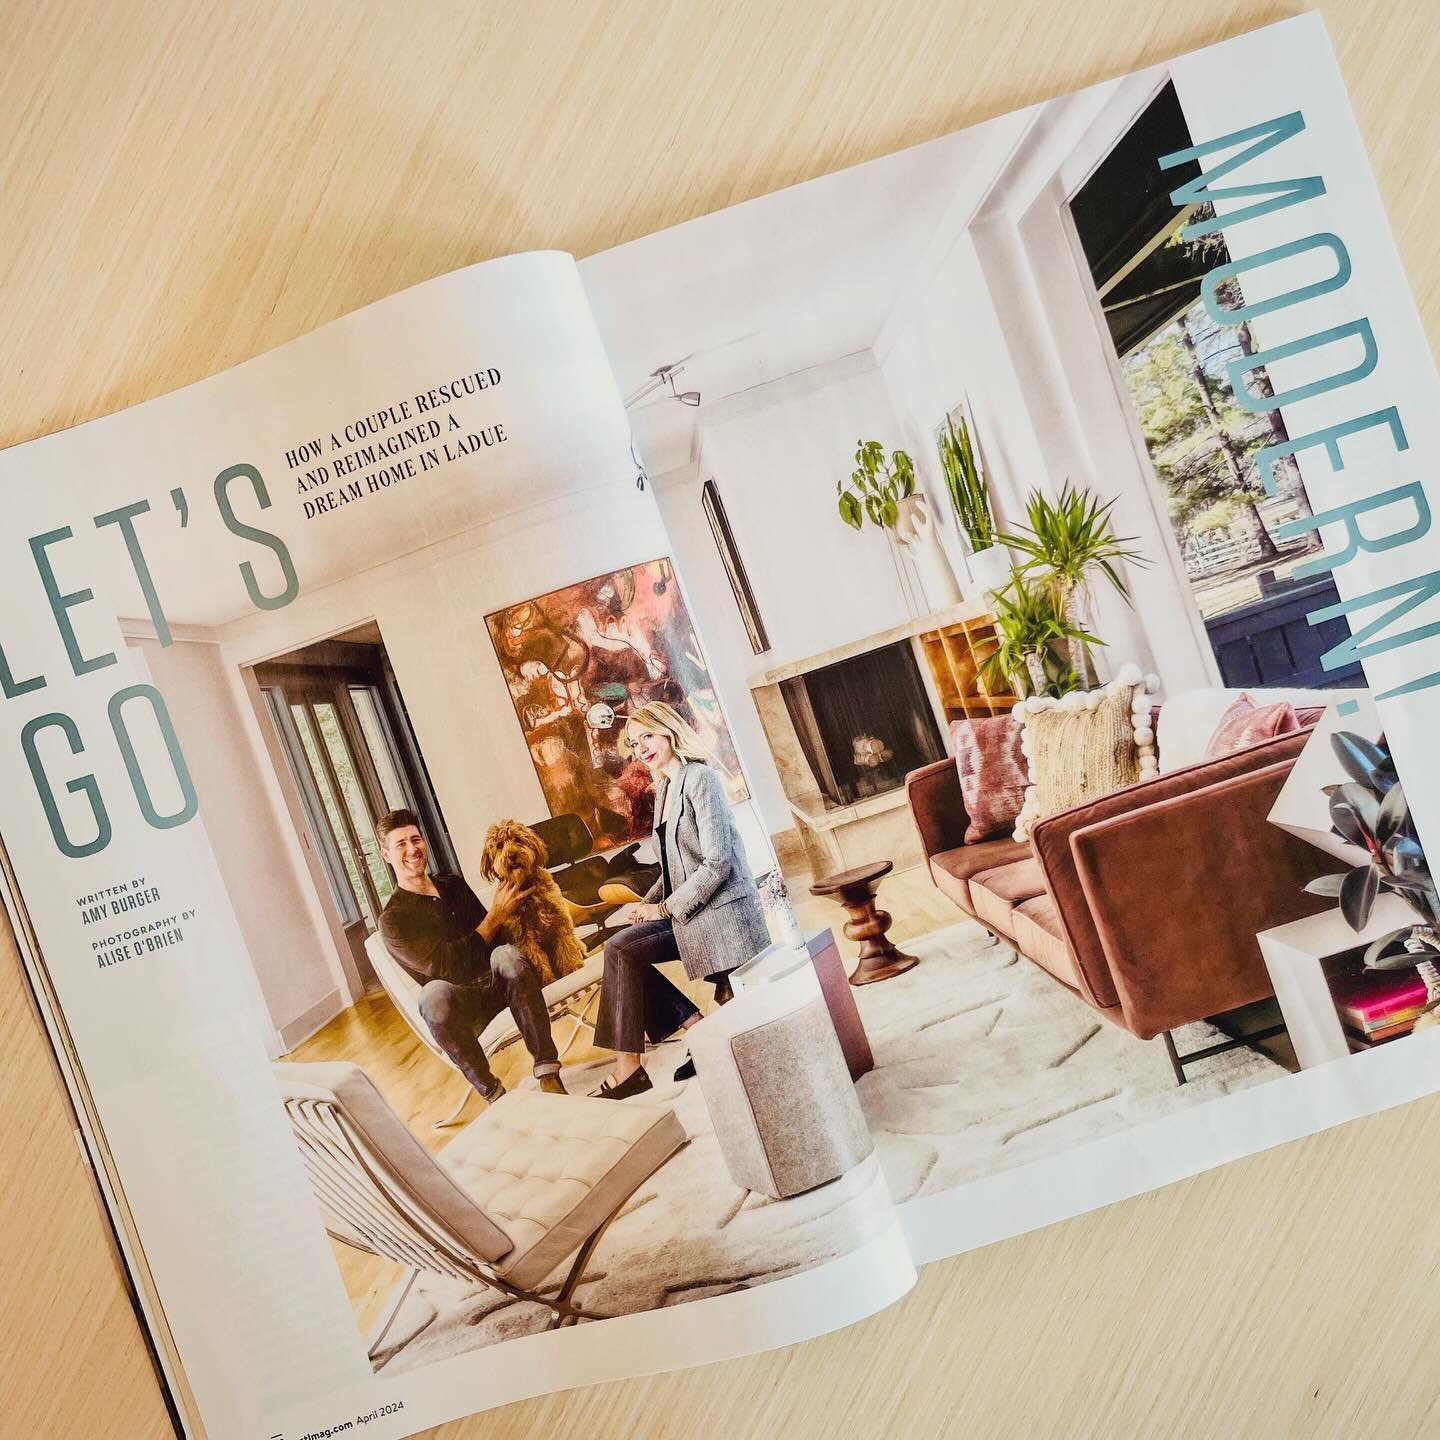 Another fabulous article by the fantastic @amybabs for @stlouismag!  These were truly wonderful clients to collaborate with and we are very proud of the end result.  Pick up your copy on newsstands soon!

And shout out to @barronconstructionstl for a